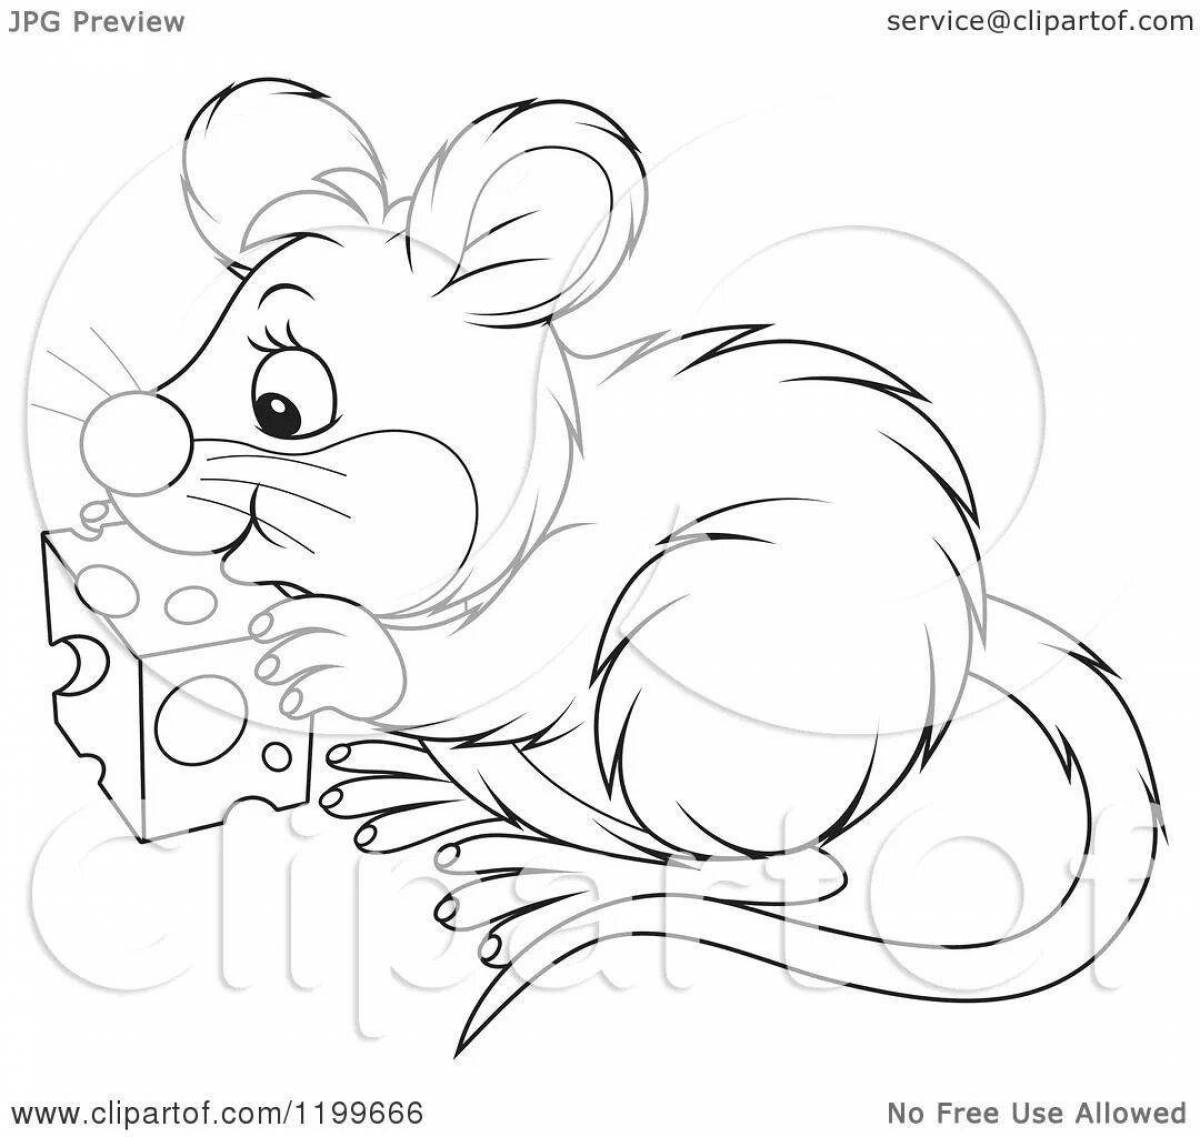 Gorgeous mouse and bear coloring page